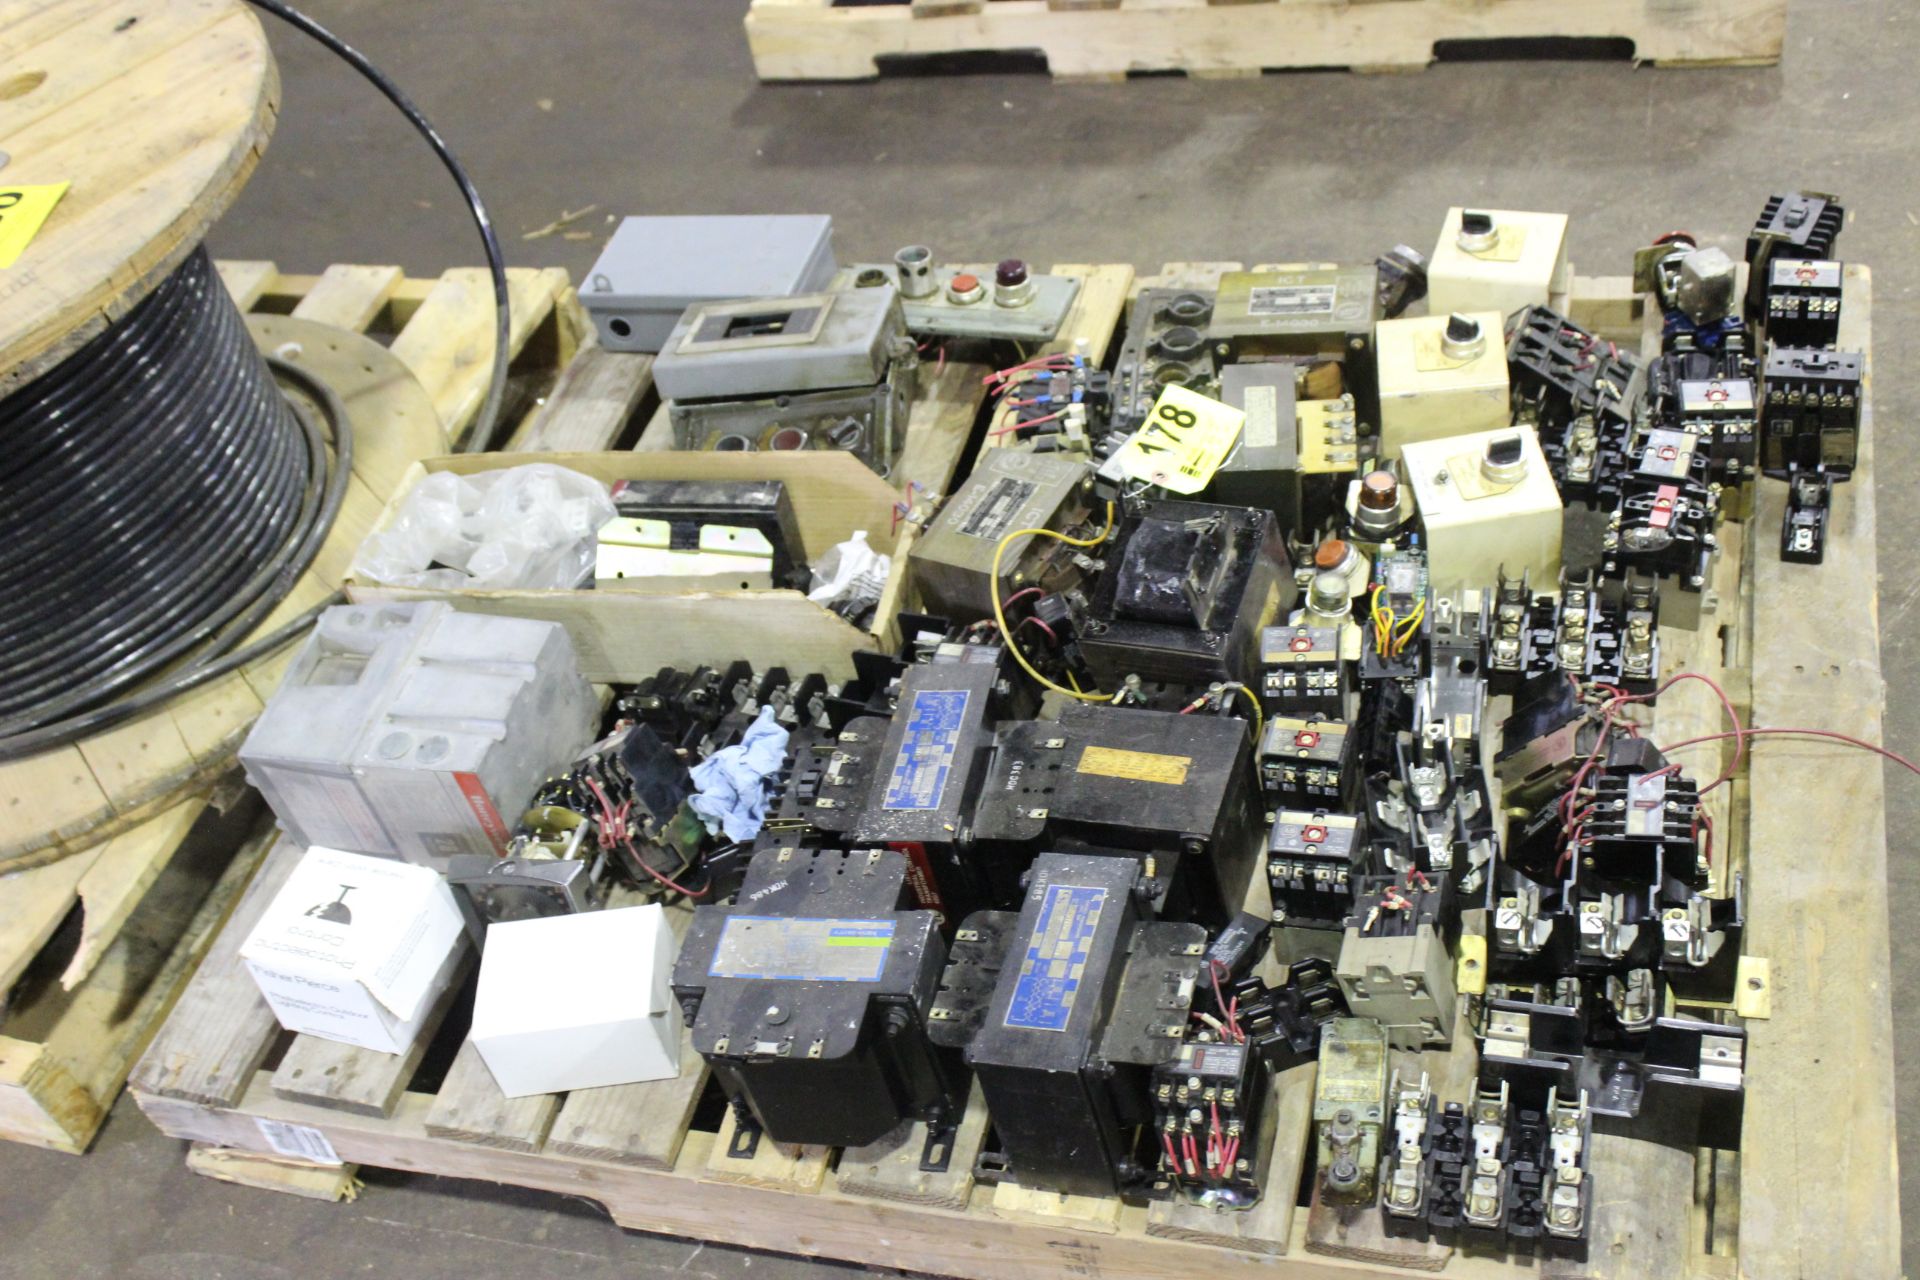 LOT-ASSORTED ELECTRIC COMPONENTS ON SKID